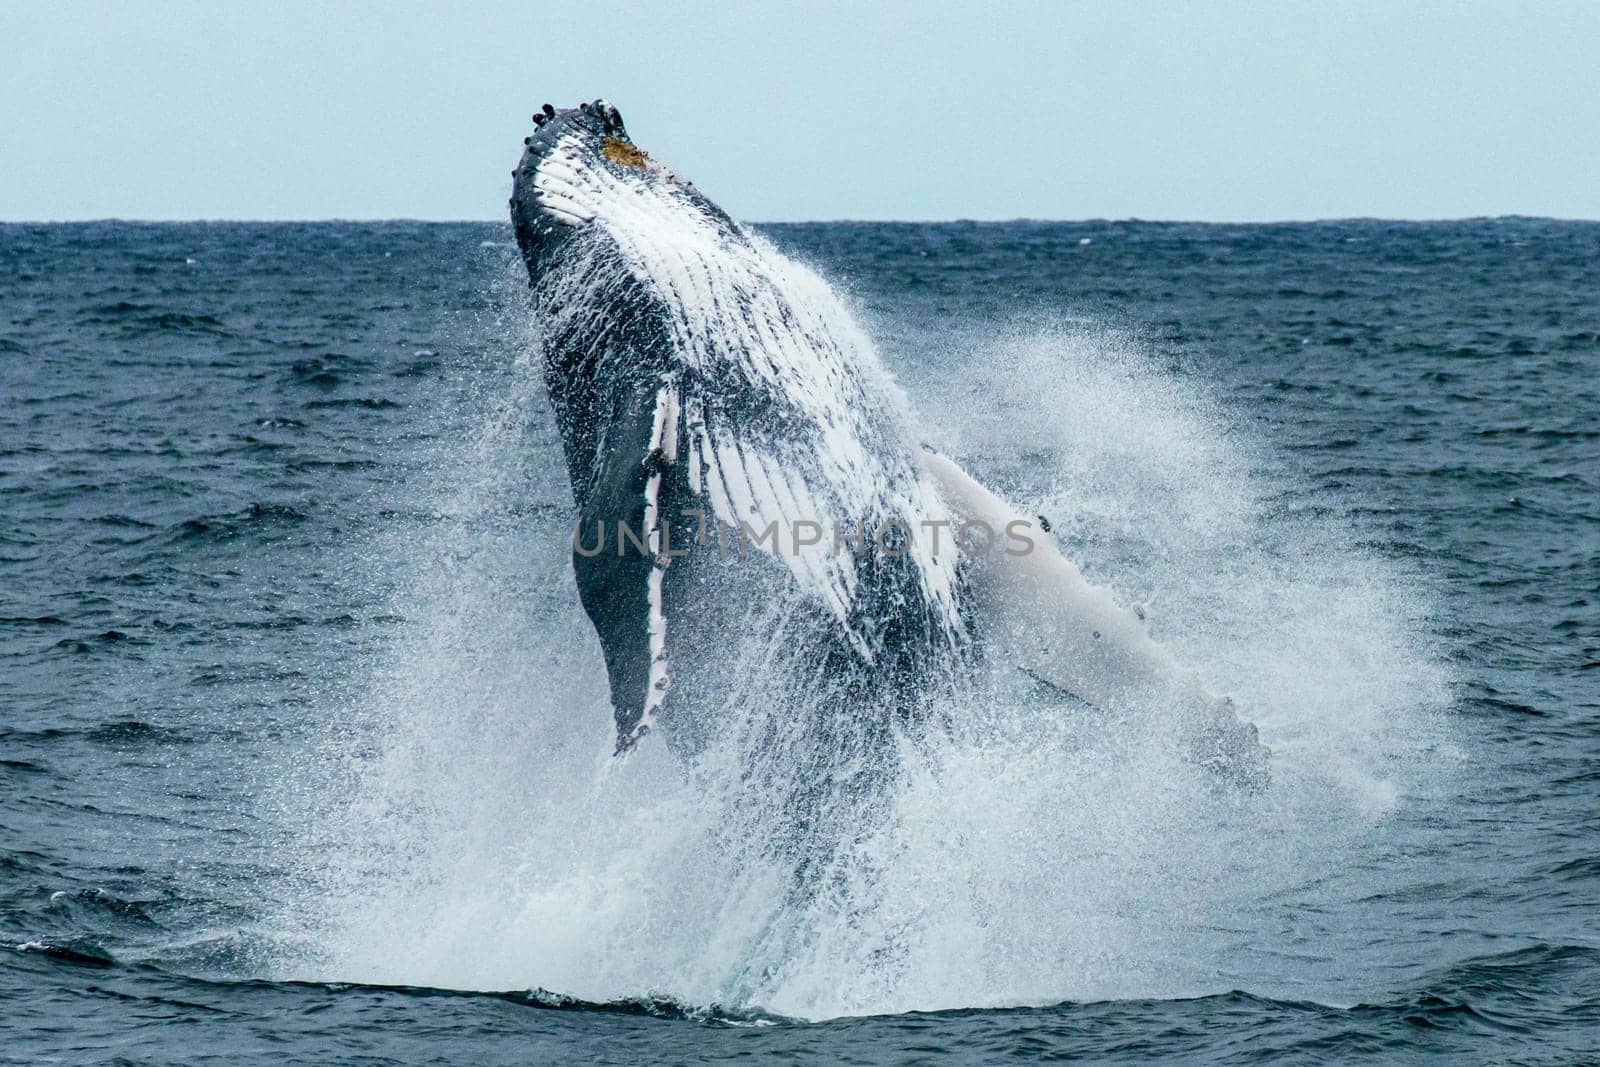 Amazing photo of a wild humpback whale breaching in the ocean by StefanMal